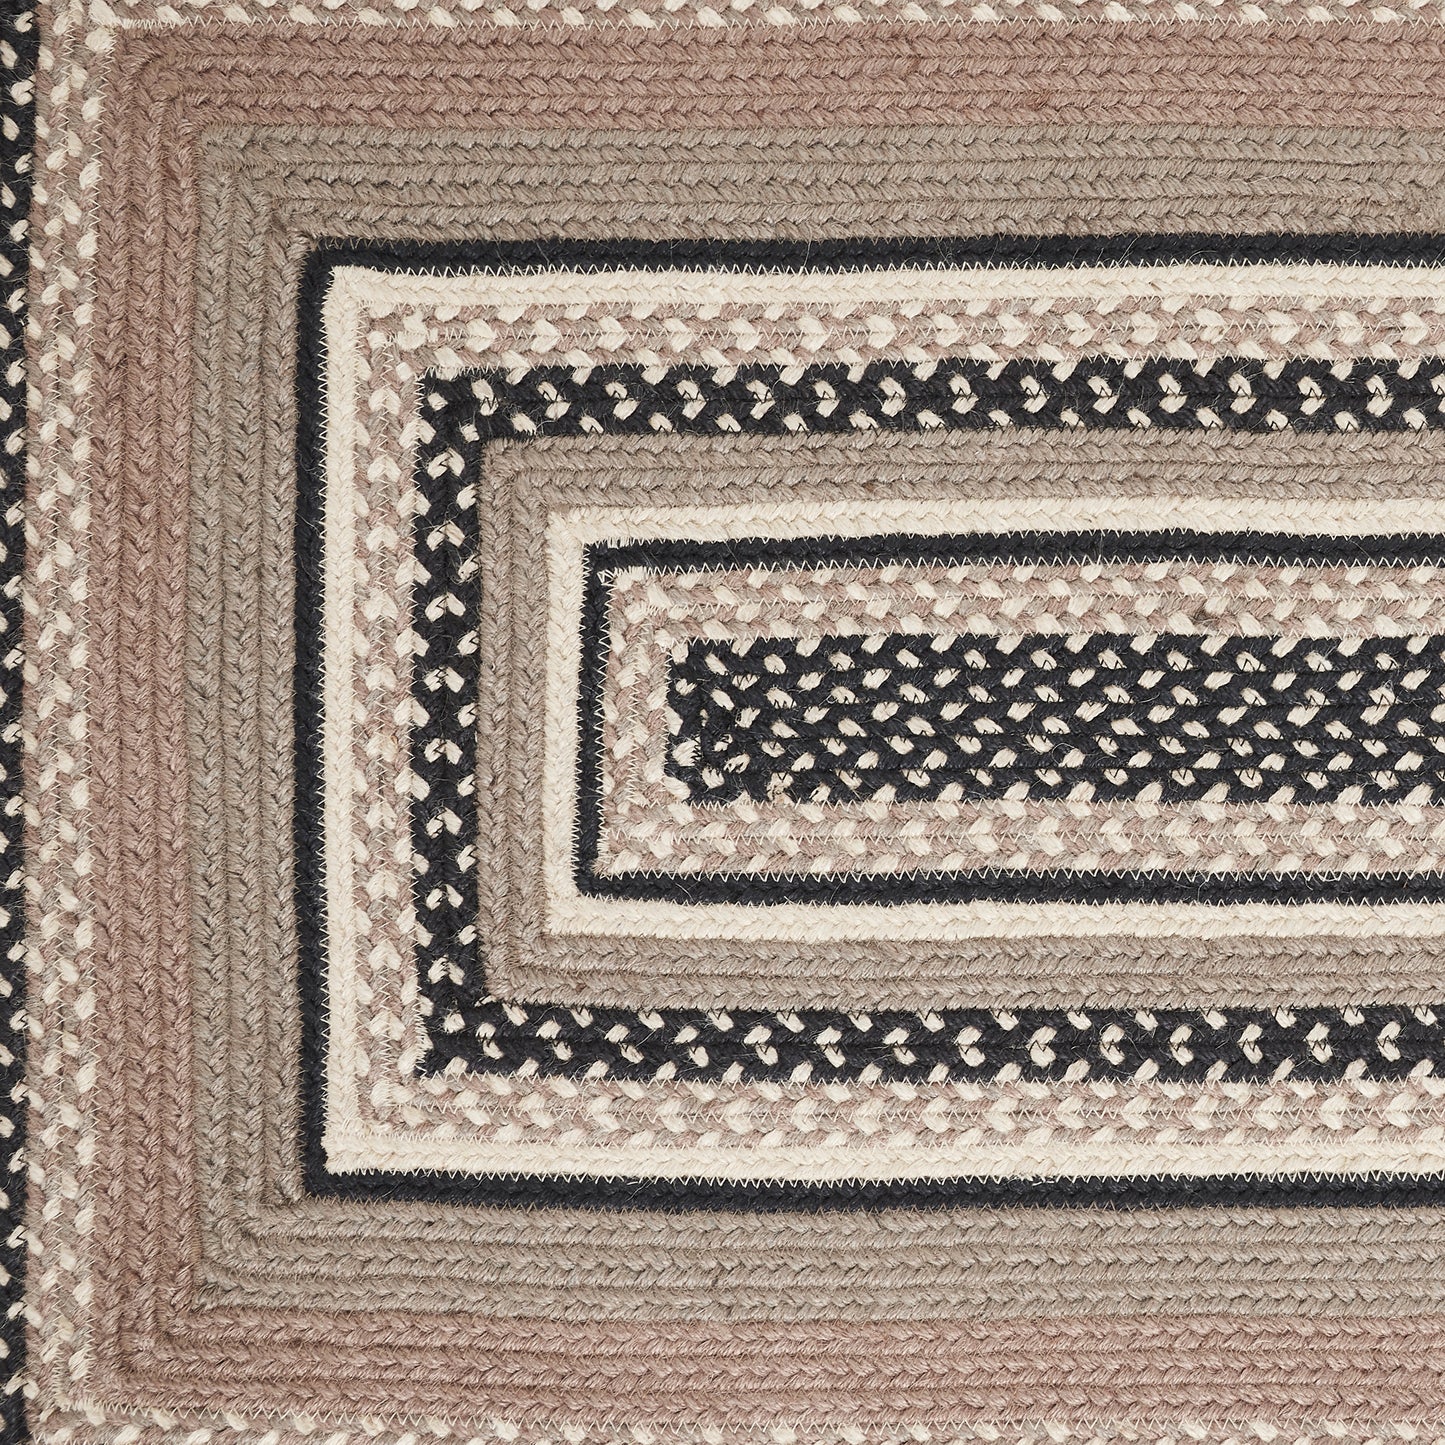 81459-Sawyer-Mill-Charcoal-Creme-Jute-Rug-Runner-Rect-w-Pad-24x96-image-7